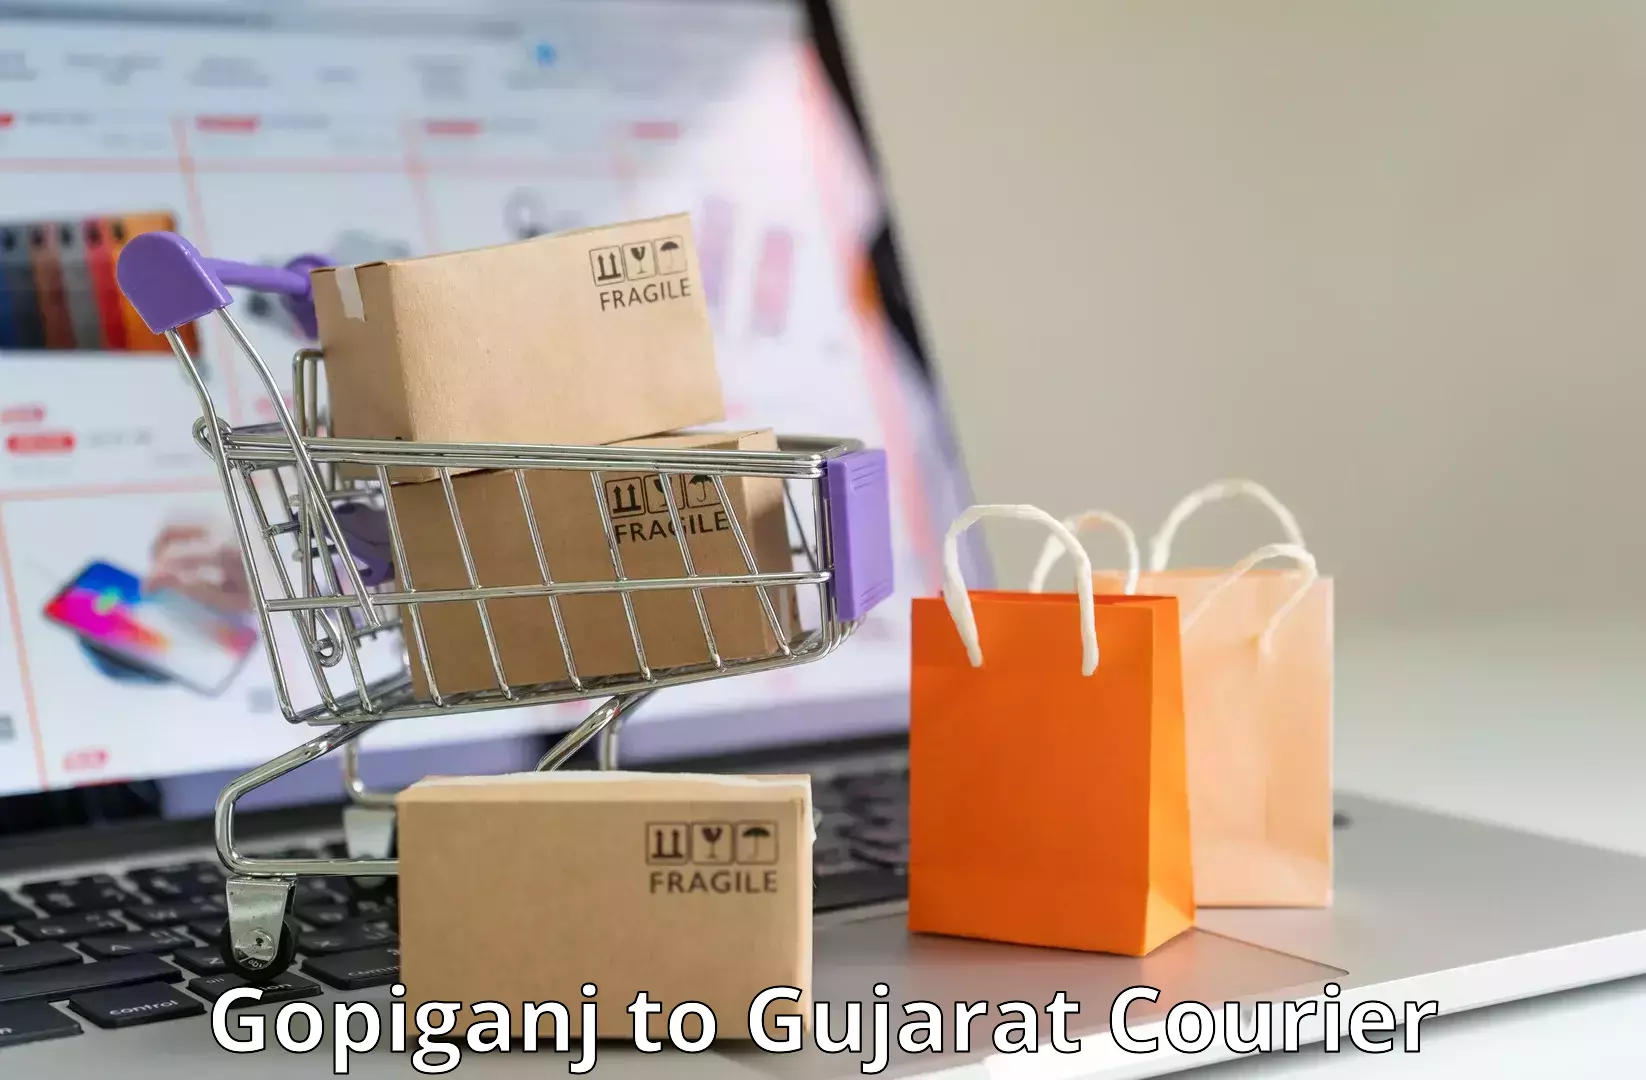 On-call courier service Gopiganj to Gujarat